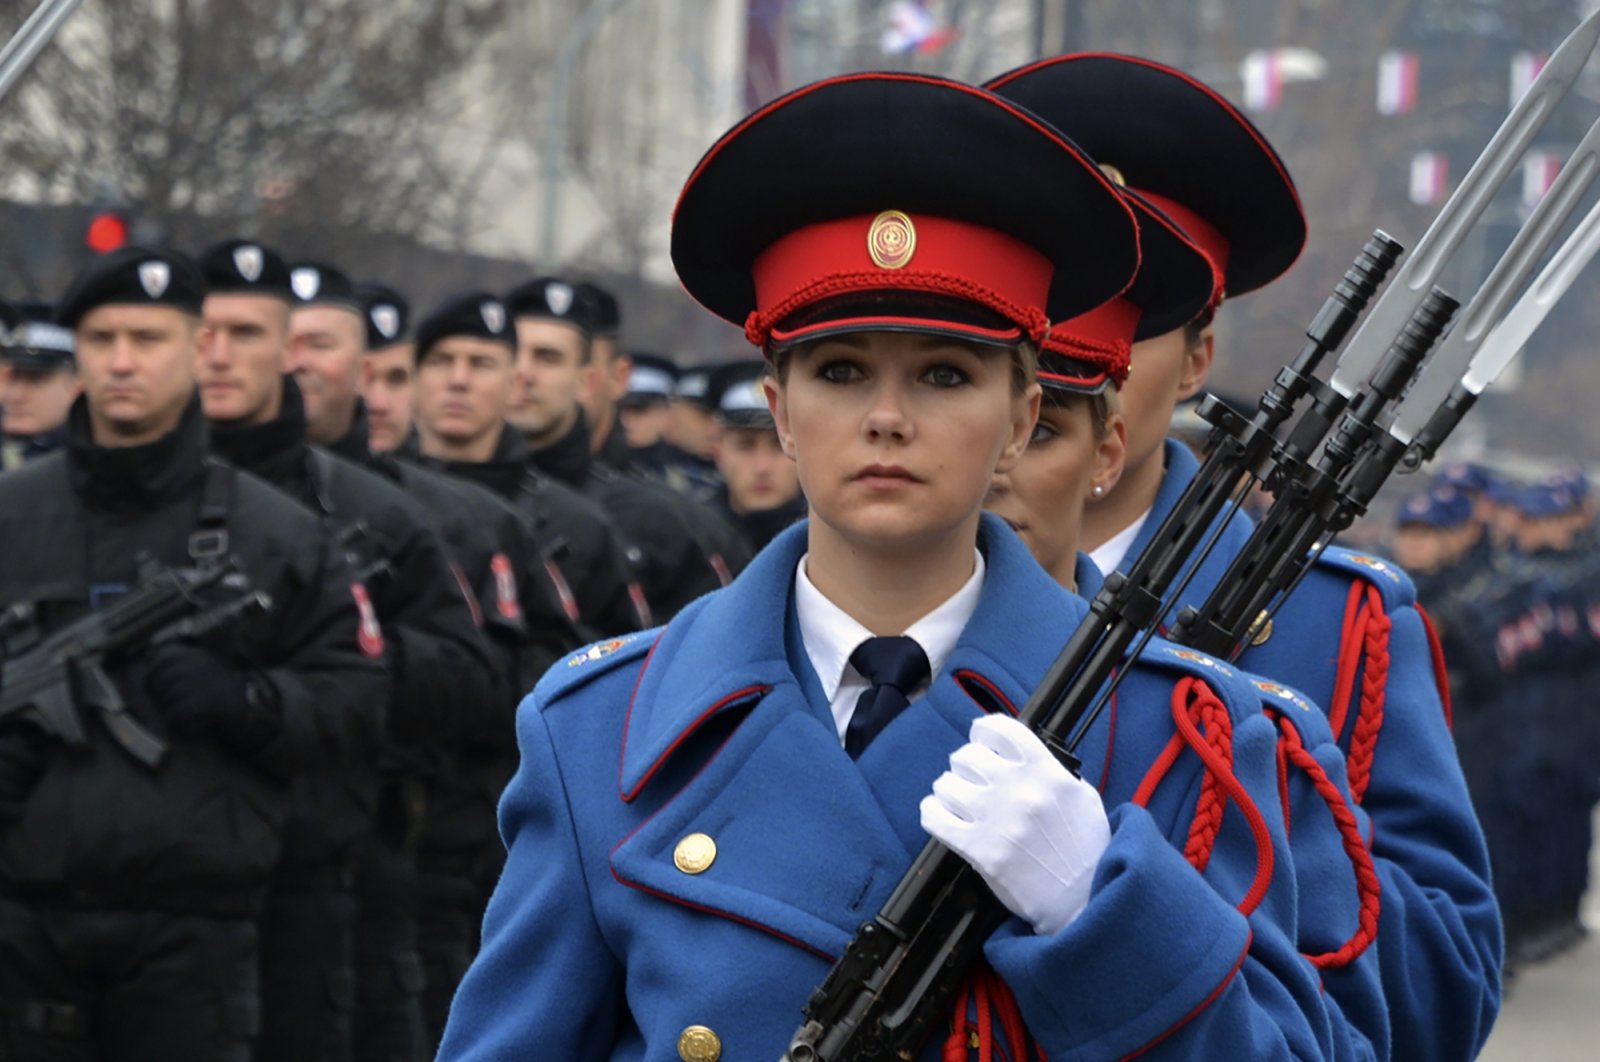 Members of the police forces of the Republic of Srpska march during a parade marking the 30th anniversary of the Republic of Srpska in Banja Luka, northern Bosnia, Sunday, Jan. 9, 2022. (AP Photo)